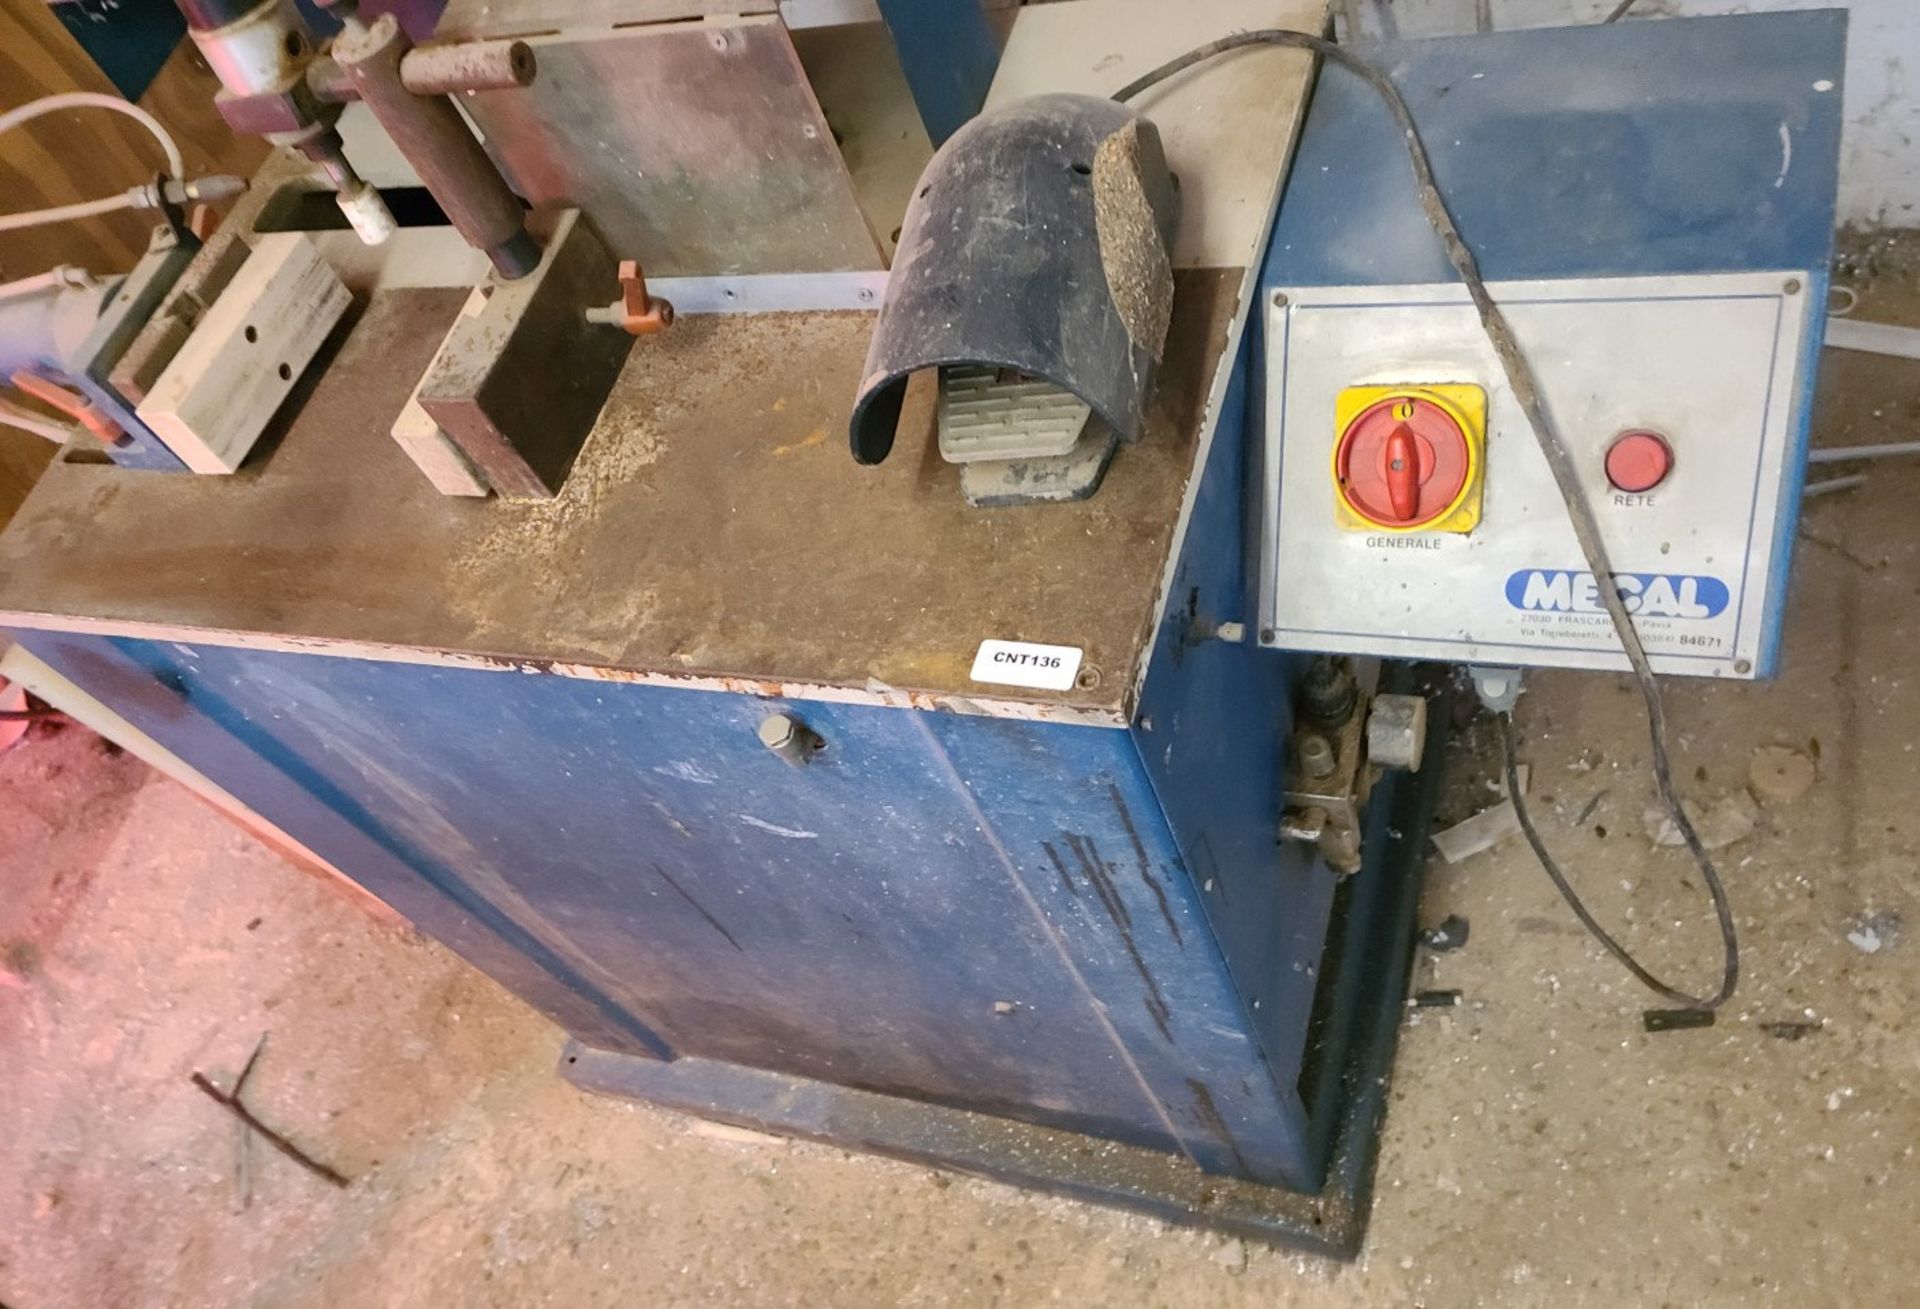 1 x Mecal Pneumatic Aluminium or UPVC End Milling Machine - Ref: CNT136 - CL846 - Location: Oxford O - Image 2 of 7